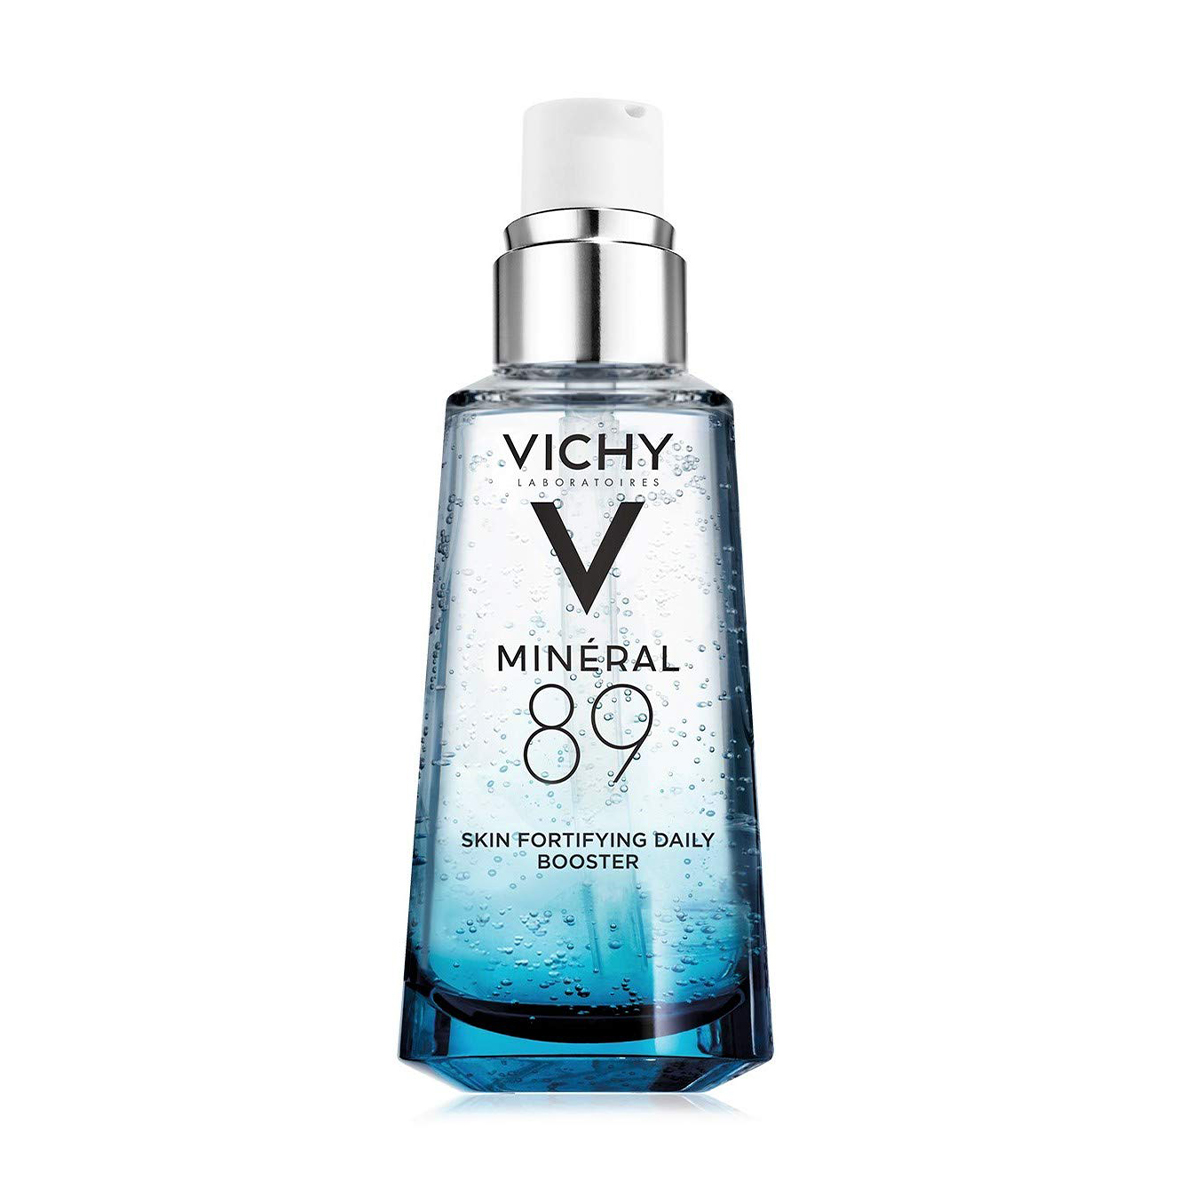 Vichy mineral 89 daily skin Booster serum and Moisturizer